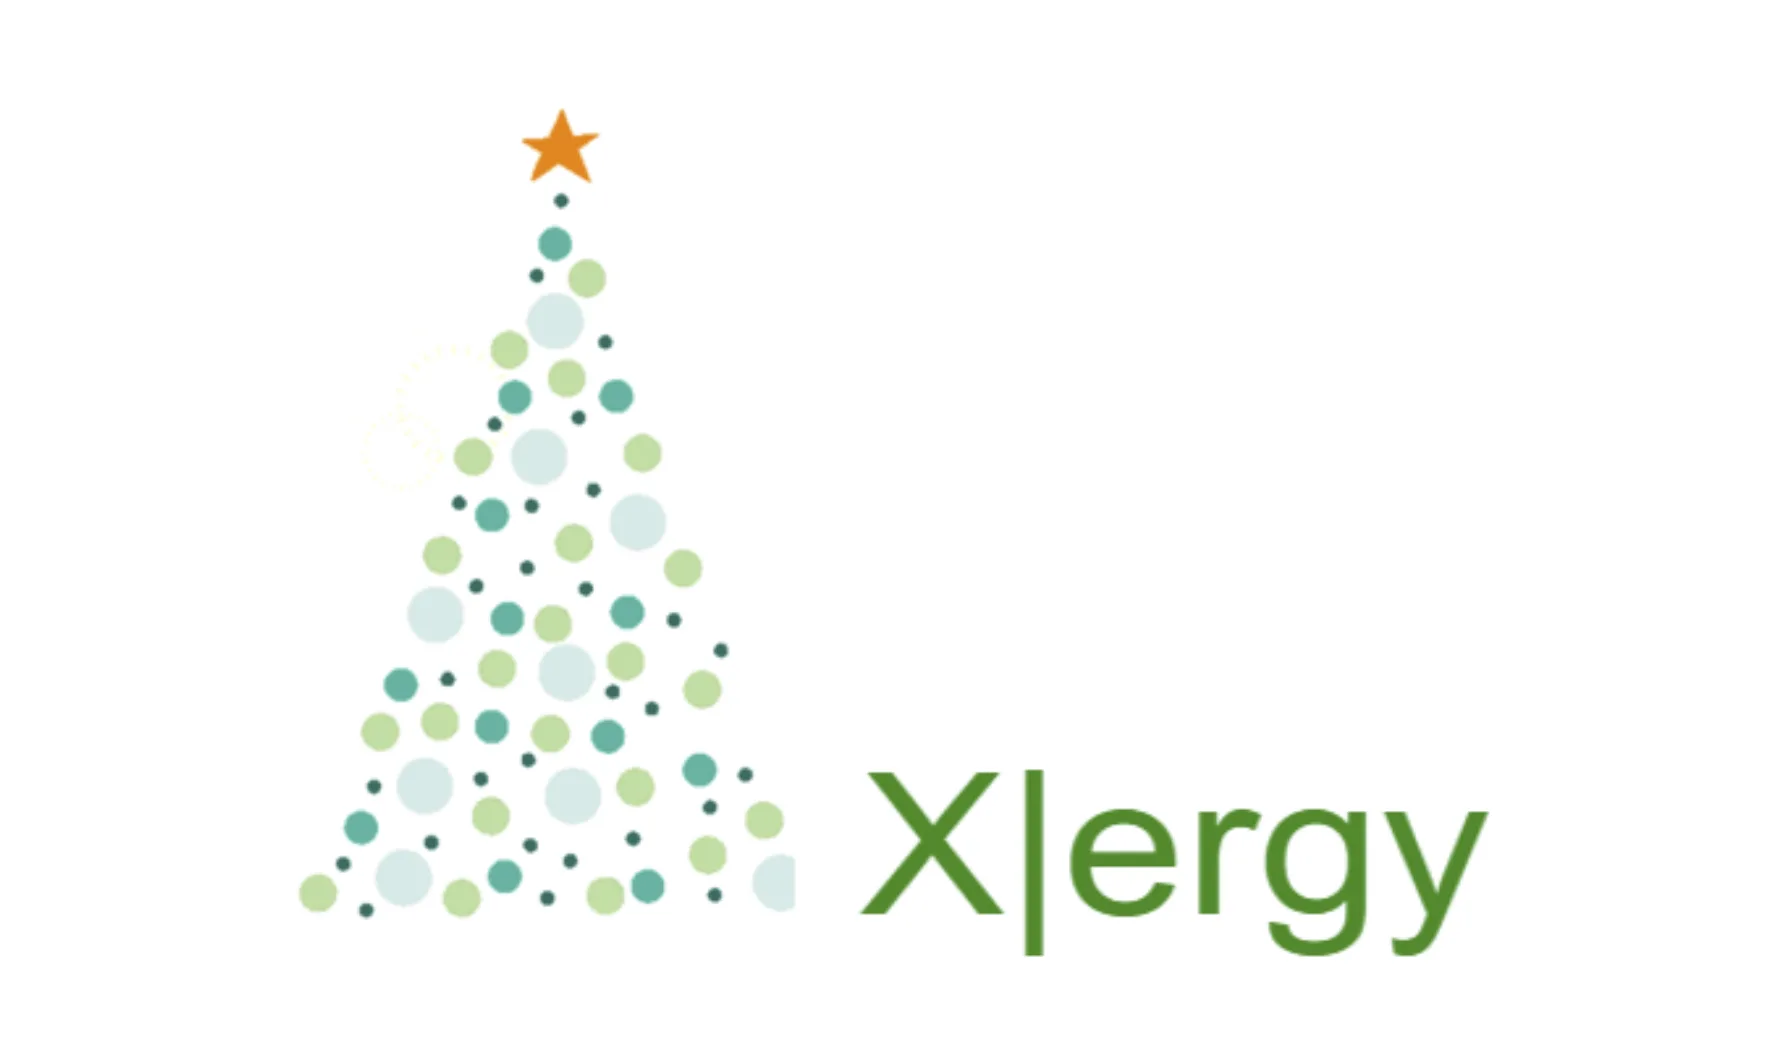 Xergy - A Year of Remarkable Growth